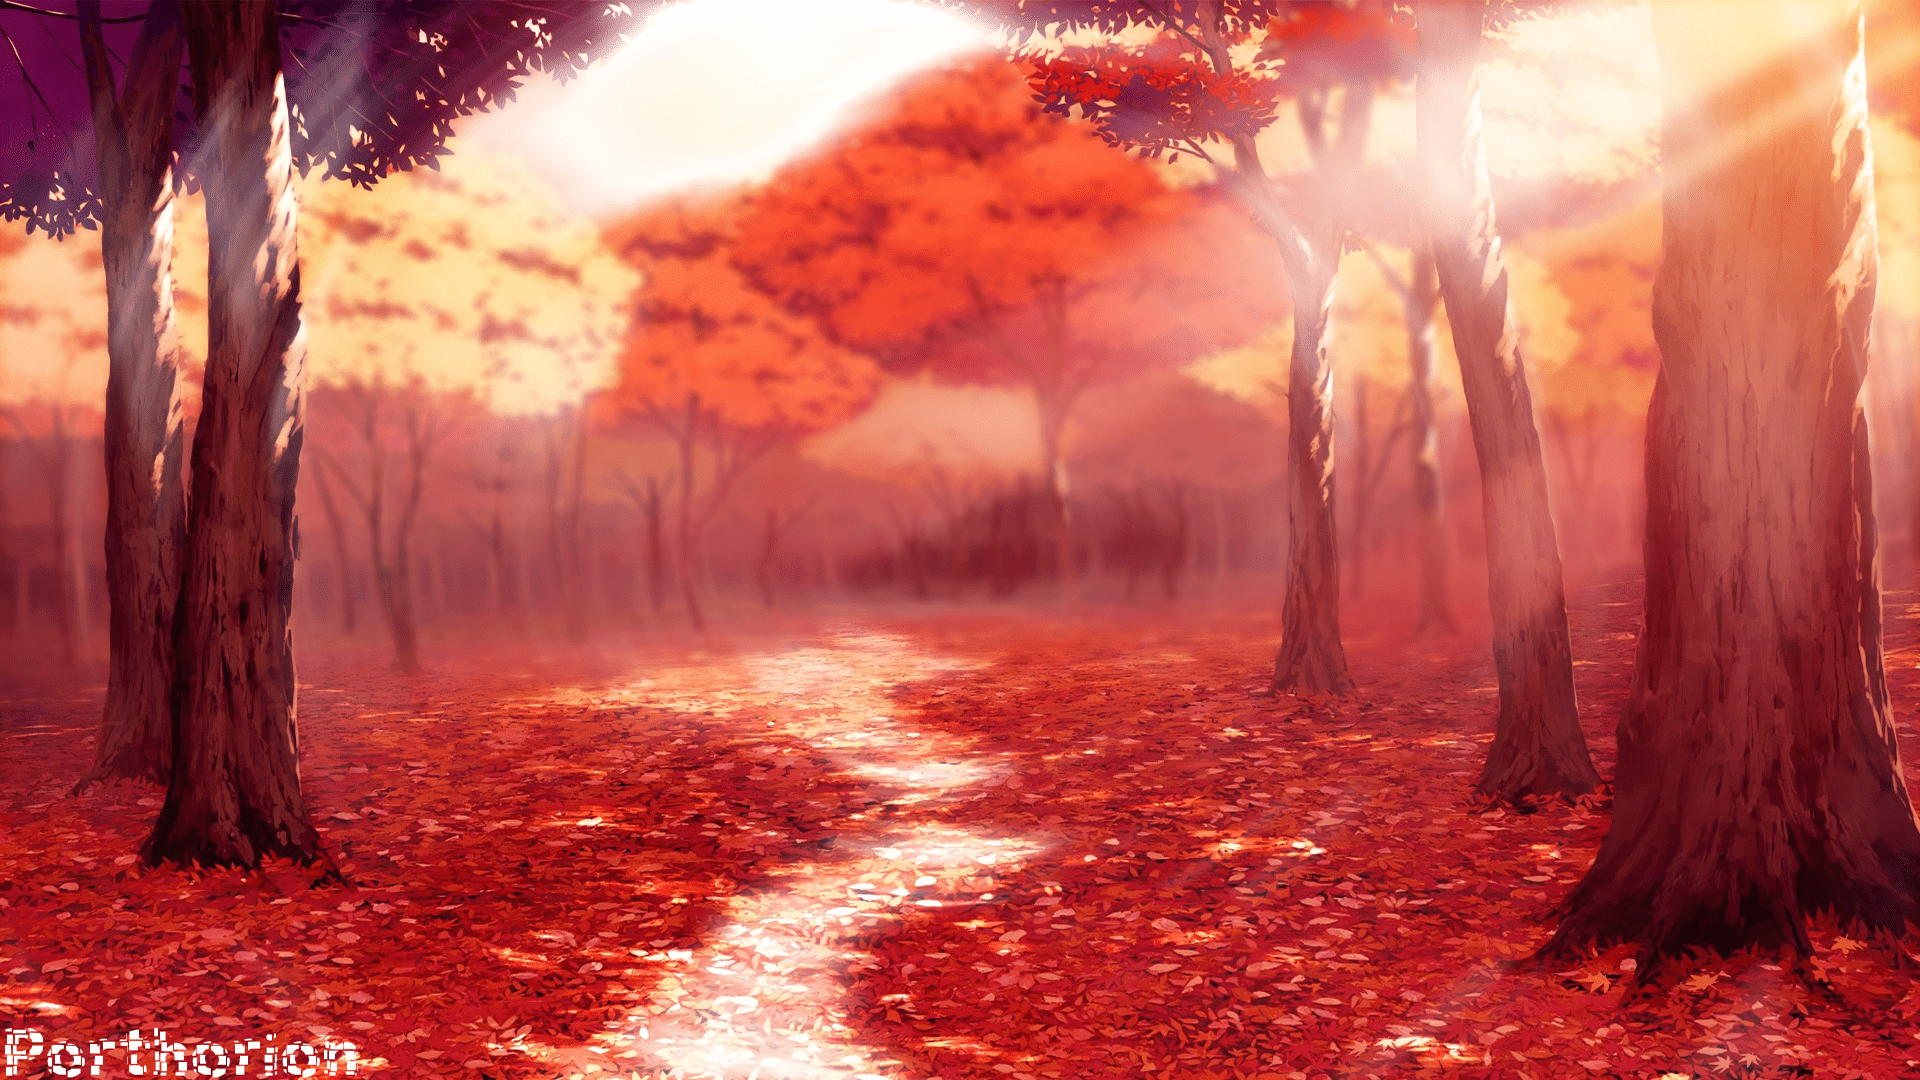 Wallpaper : 1280x781 px, anime, fall 1280x781 - CoolWallpapers - 1107750 -  HD Wallpapers - WallHere